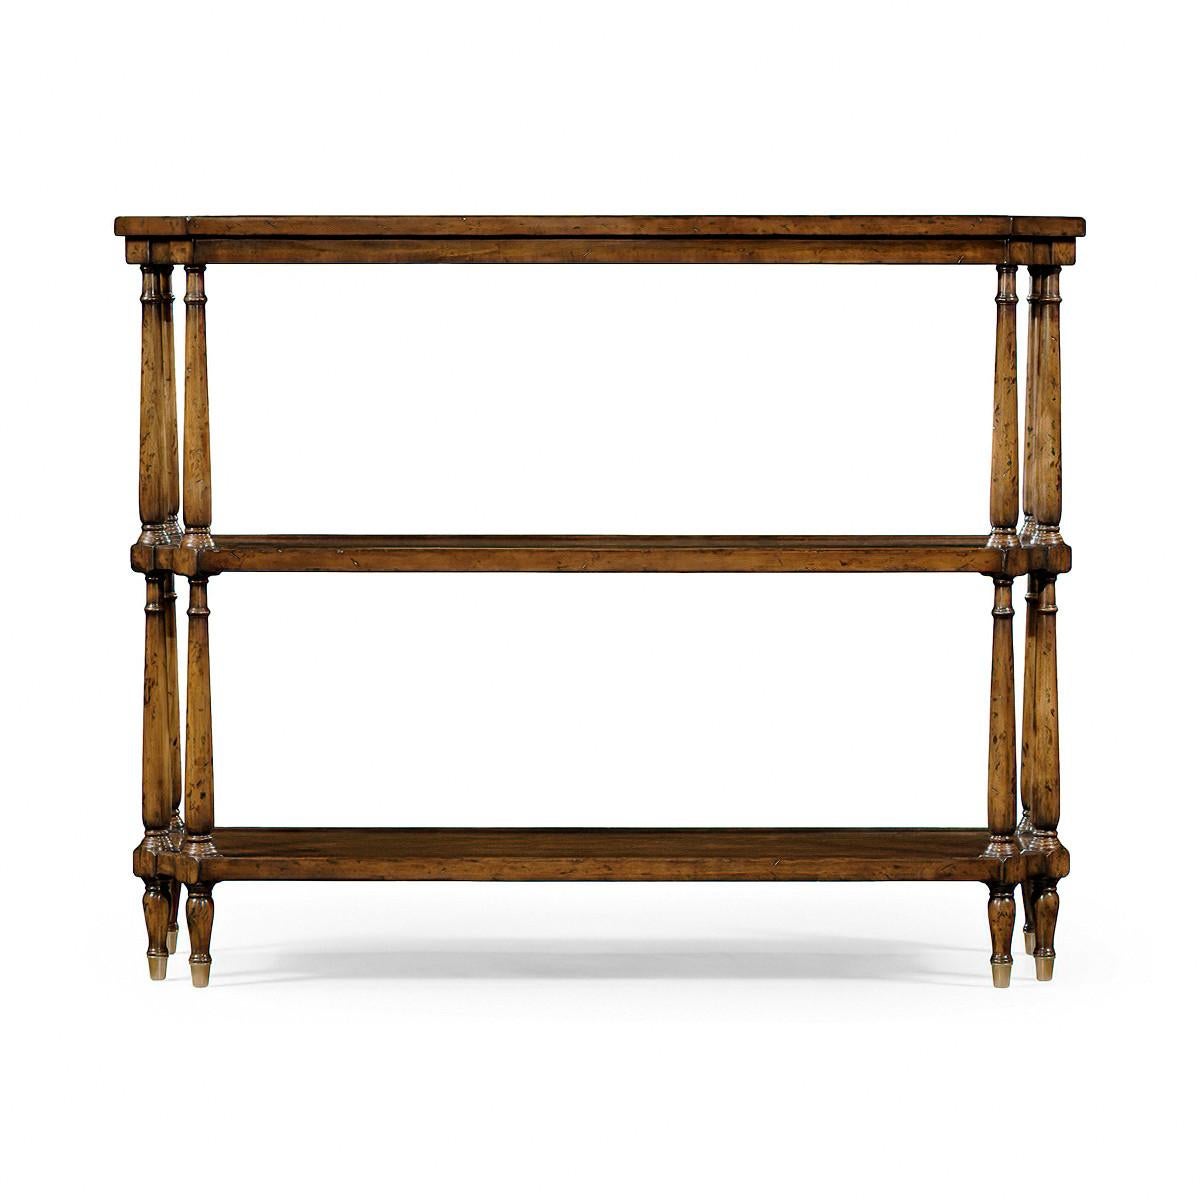 English country walnut console table with a wooden gallery, canted corners, six turned legs supporting three tiers, and raised on brass caster feet. Hand finished with a warm antiqued patina.

Dimensions: 48